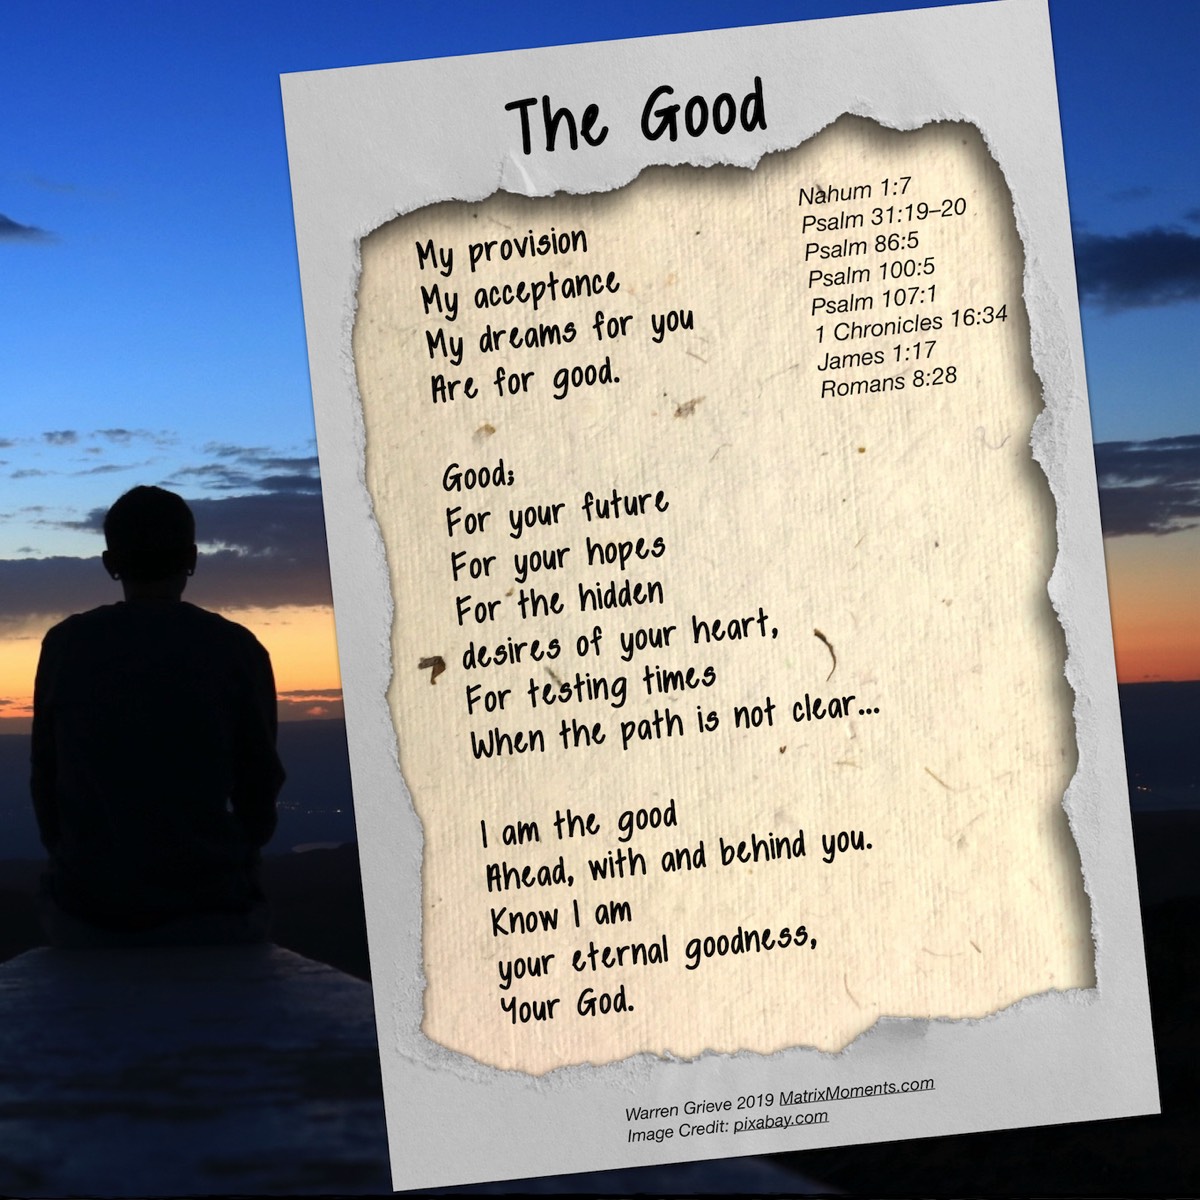 The Goodness of God with Bible verses.